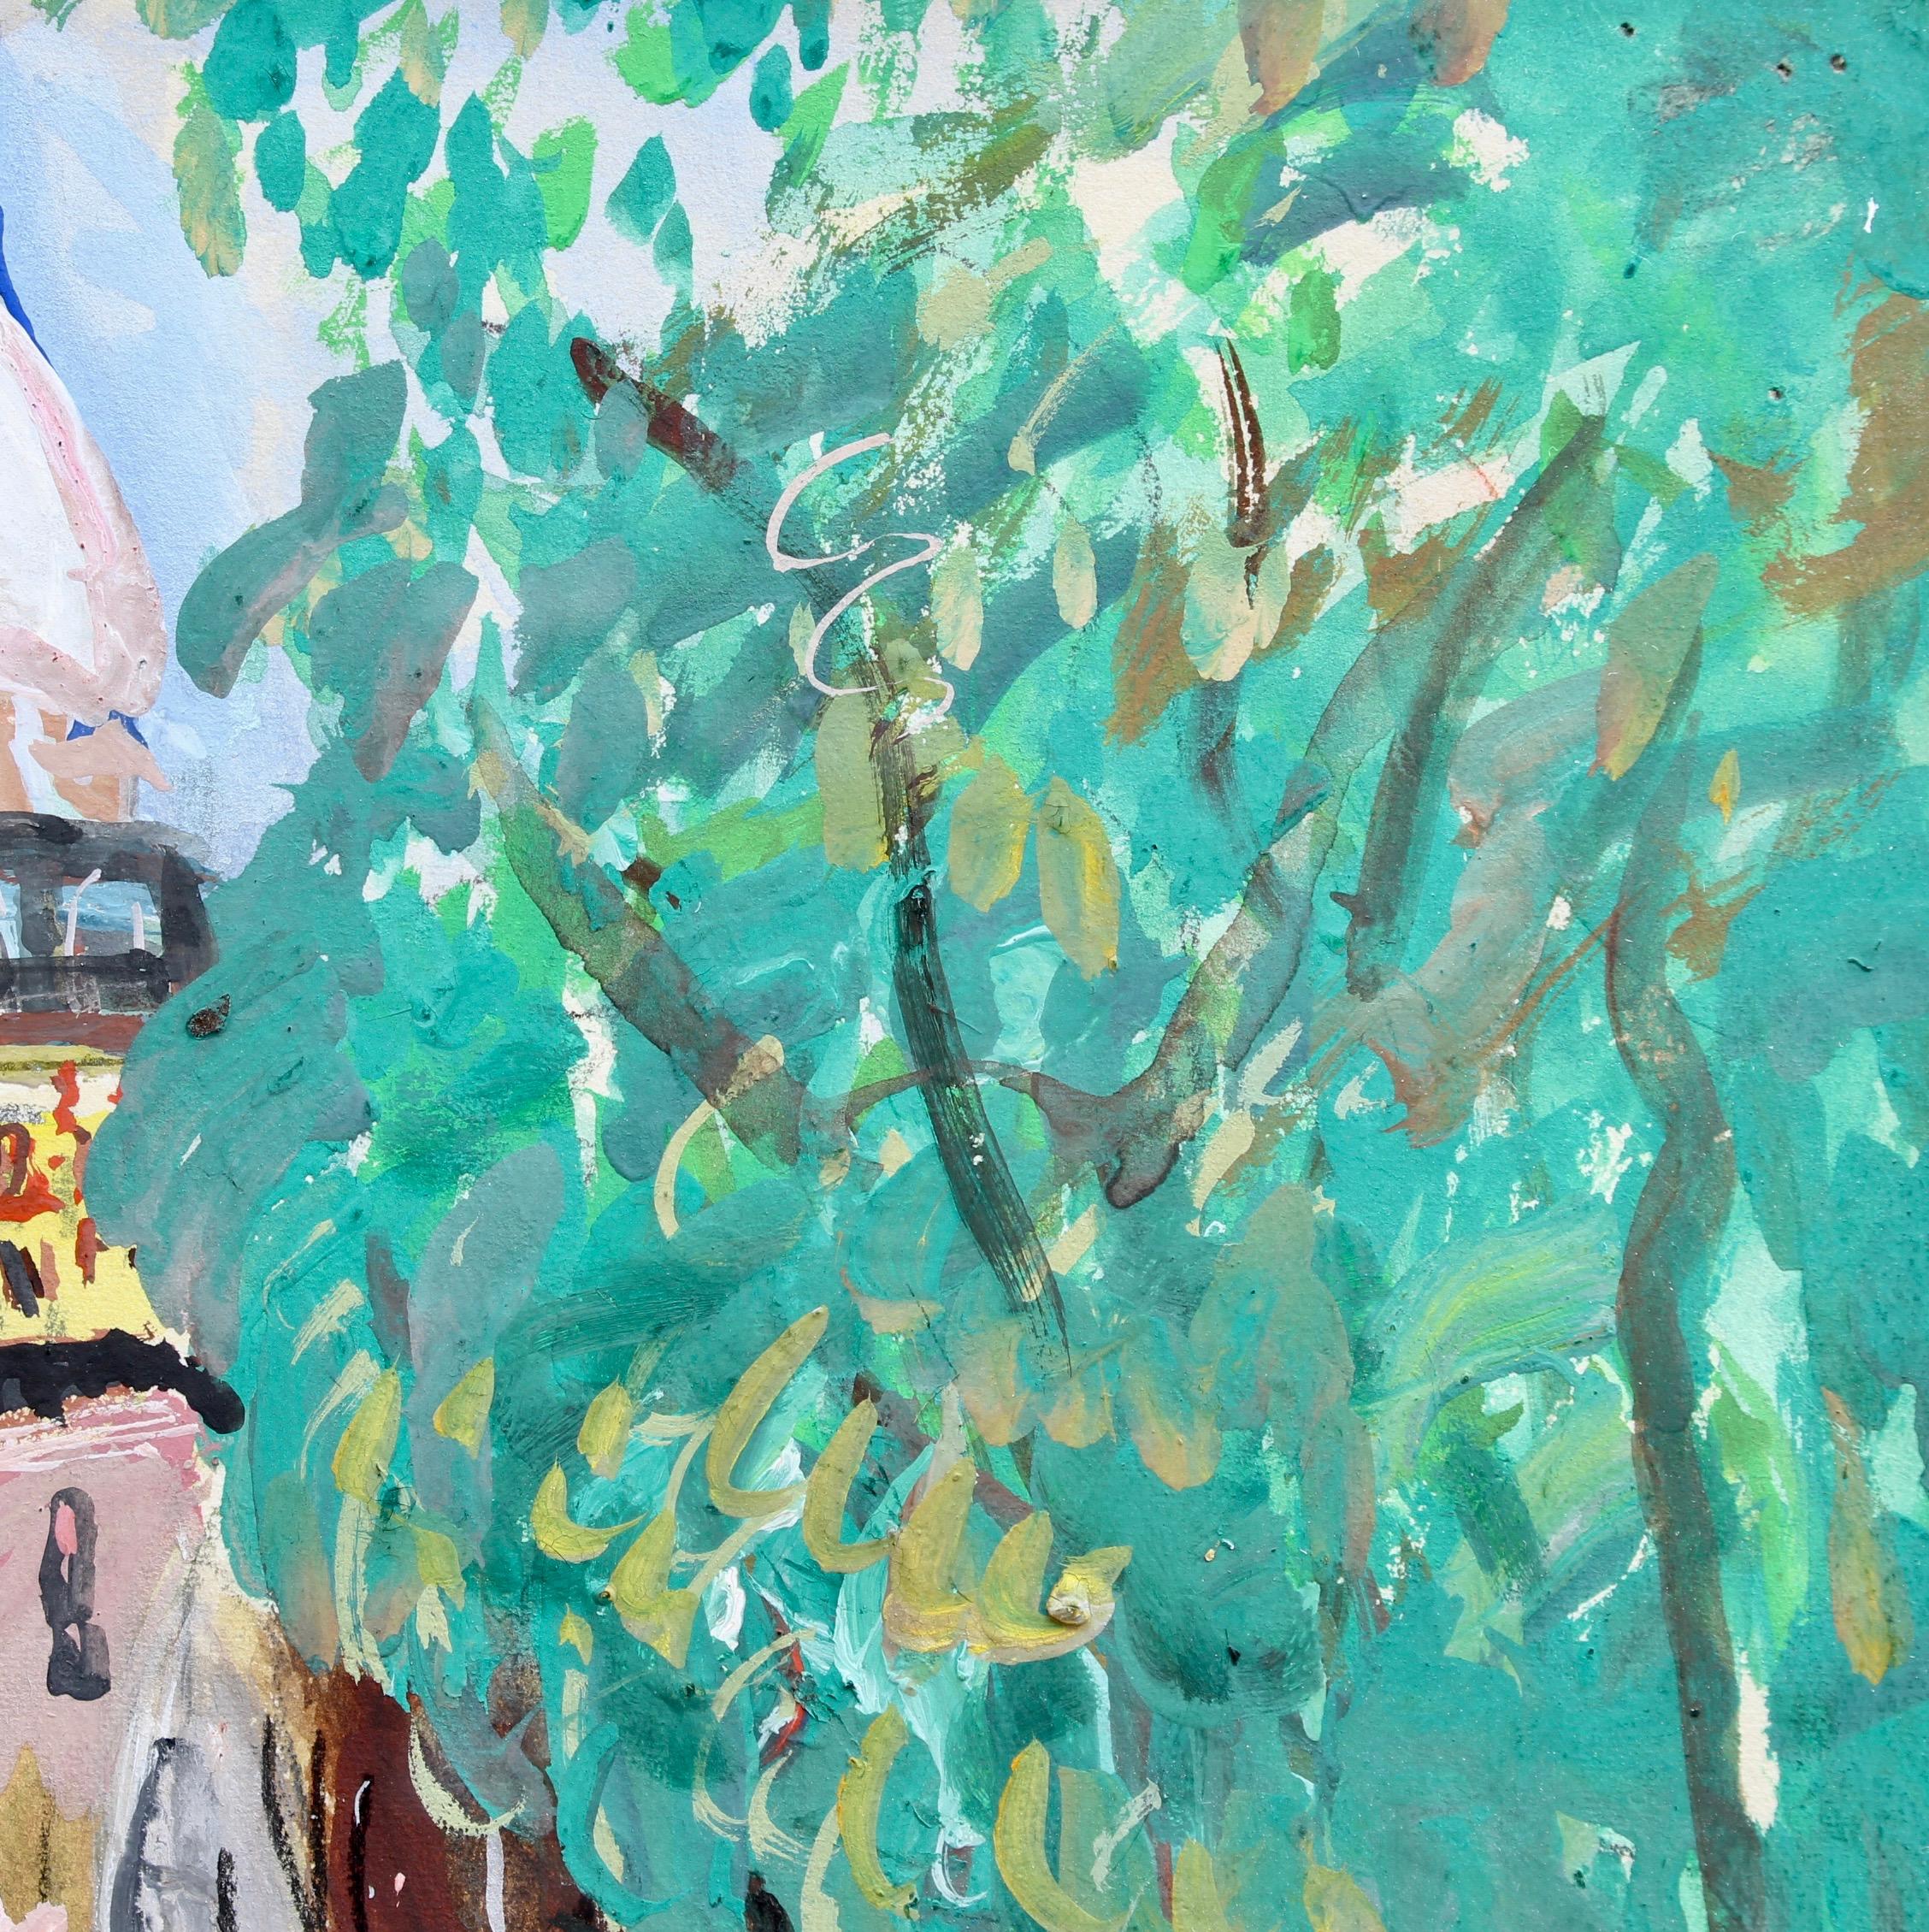 'View of Montmartre from Rue Lepic', gouache on paper (circa 1930s), by Lucien Génin. Montmartre became a hub for European artists in the late 19th century. Many of the era’s most renowned painters called Lepic home during this period, the most